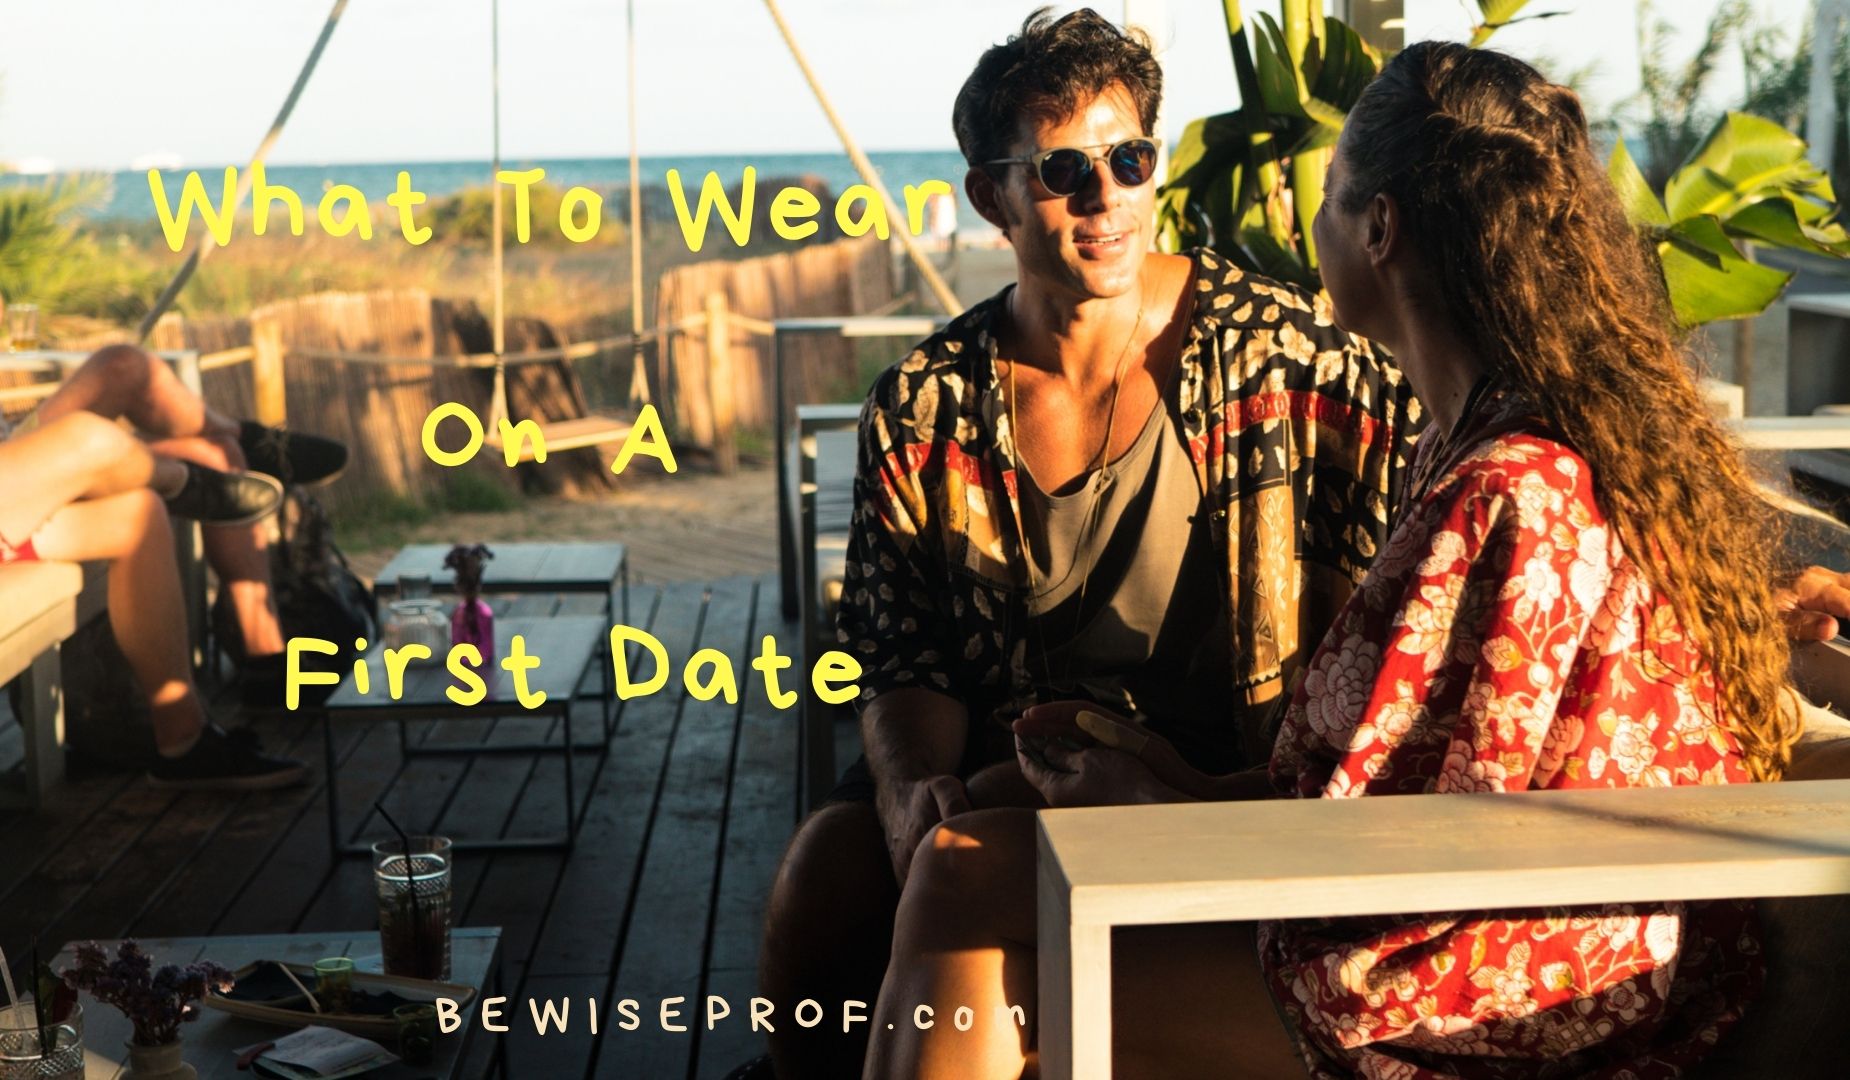 What To Wear On A First Date